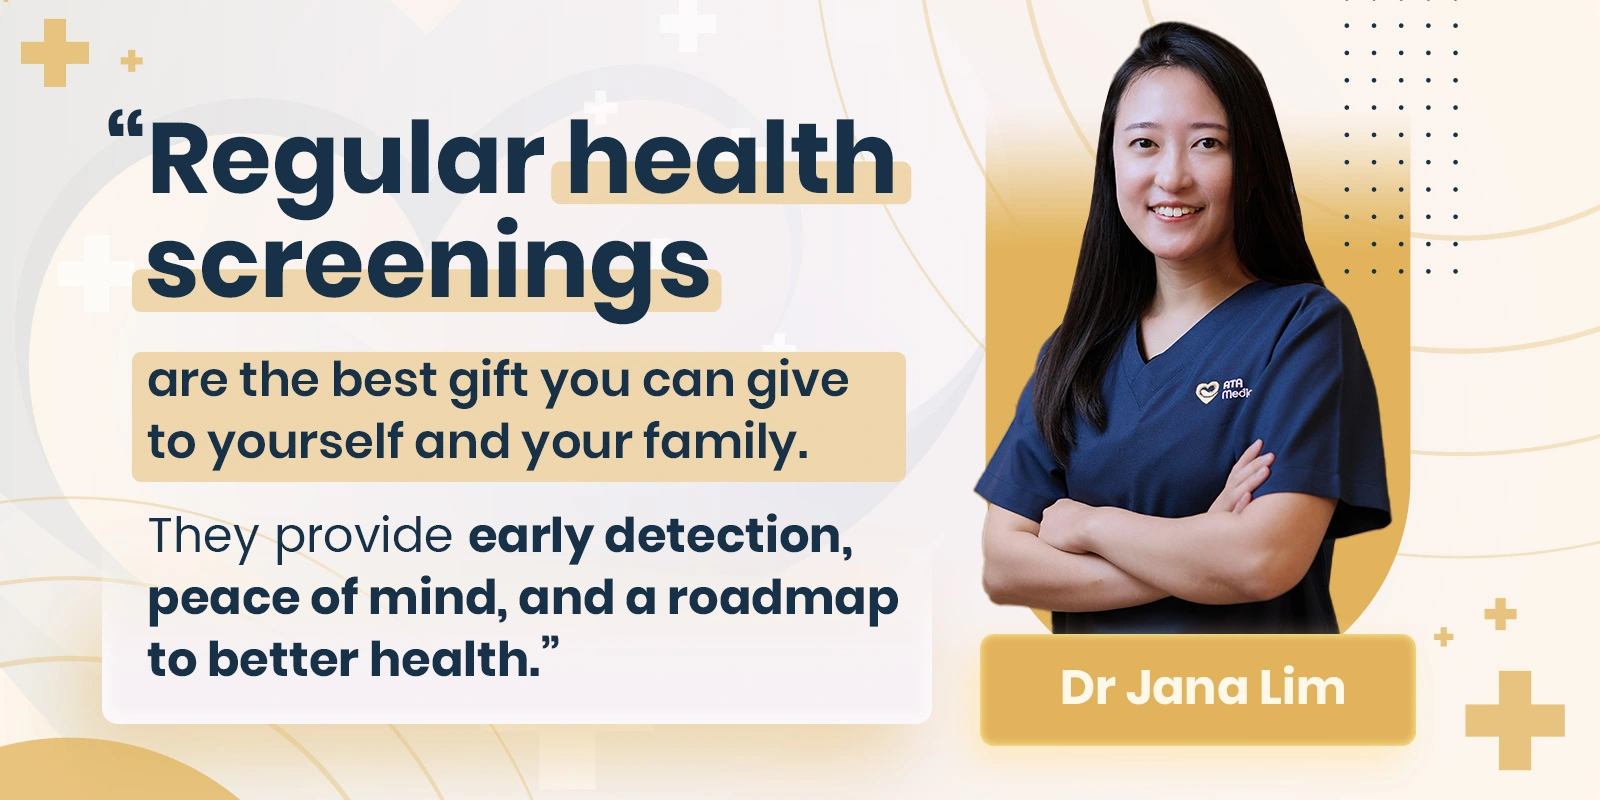 Dr Jana Lim: Regular health screenings are the best gift you can give to yourself and your family. They provide early detection, peace of mind, and a roadmap to better health.